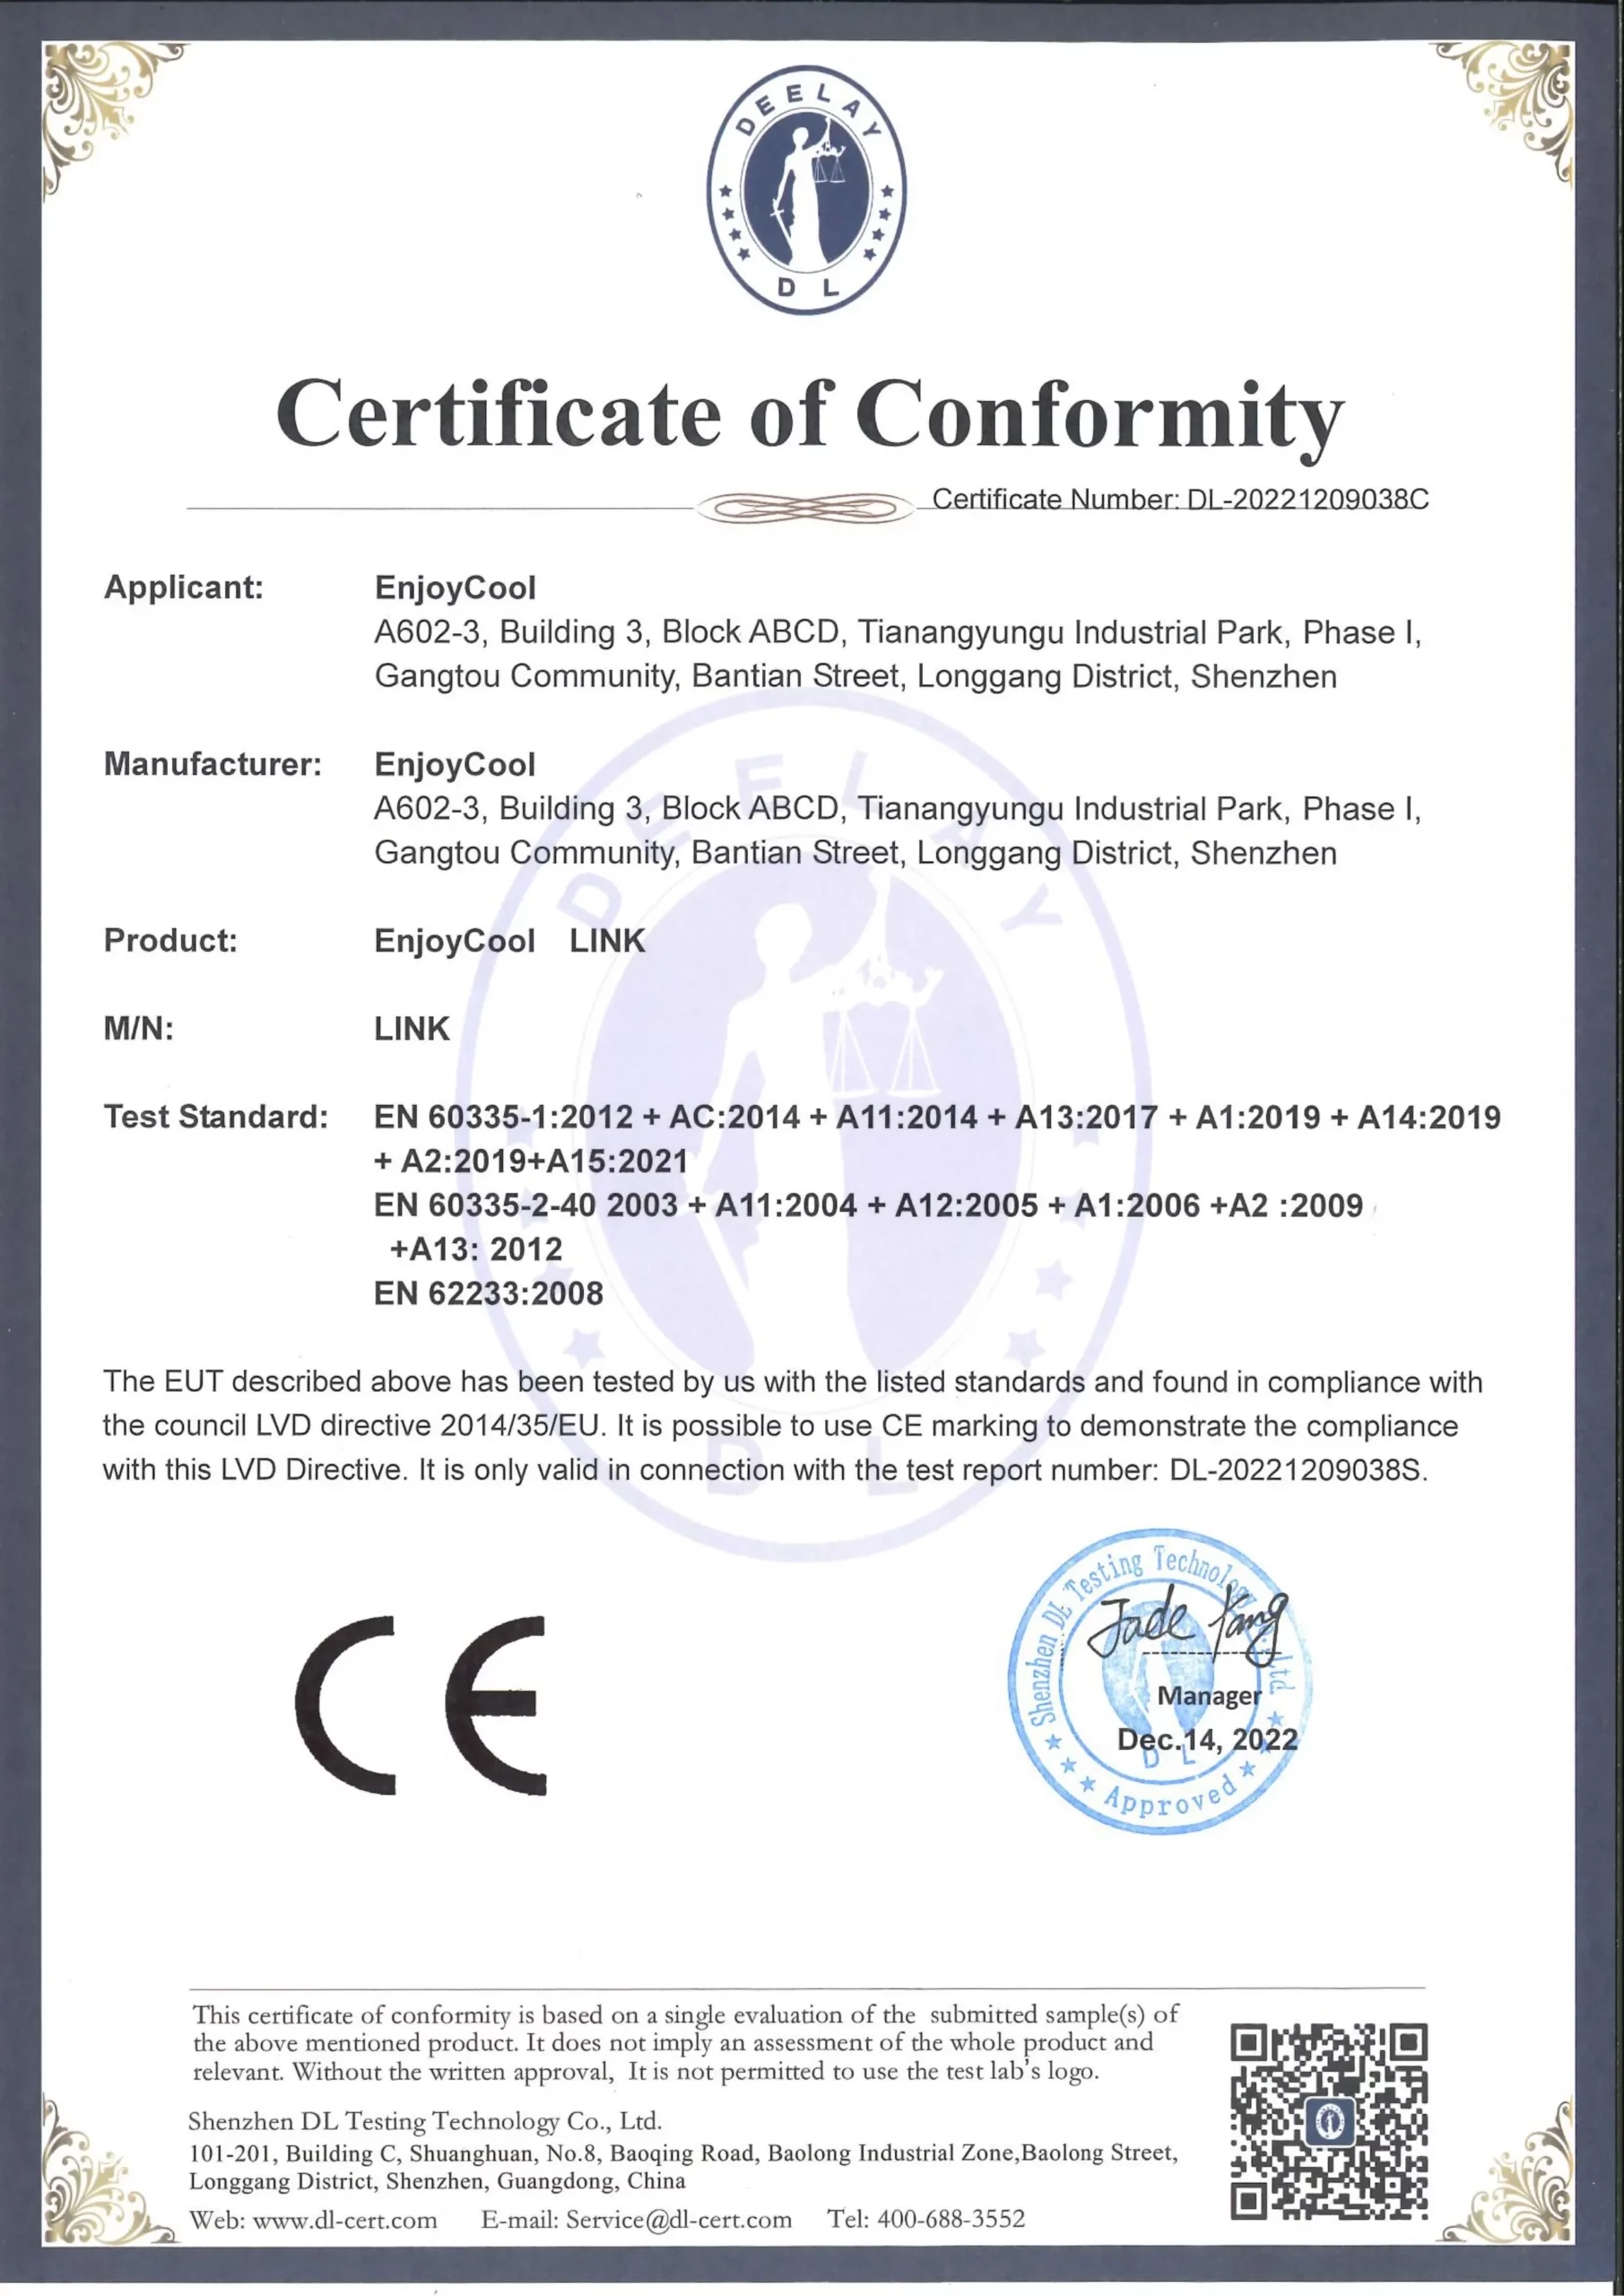 EnjoyCool Link Portable Outdoor Air Conditioner Certificate of Conformity Scaled